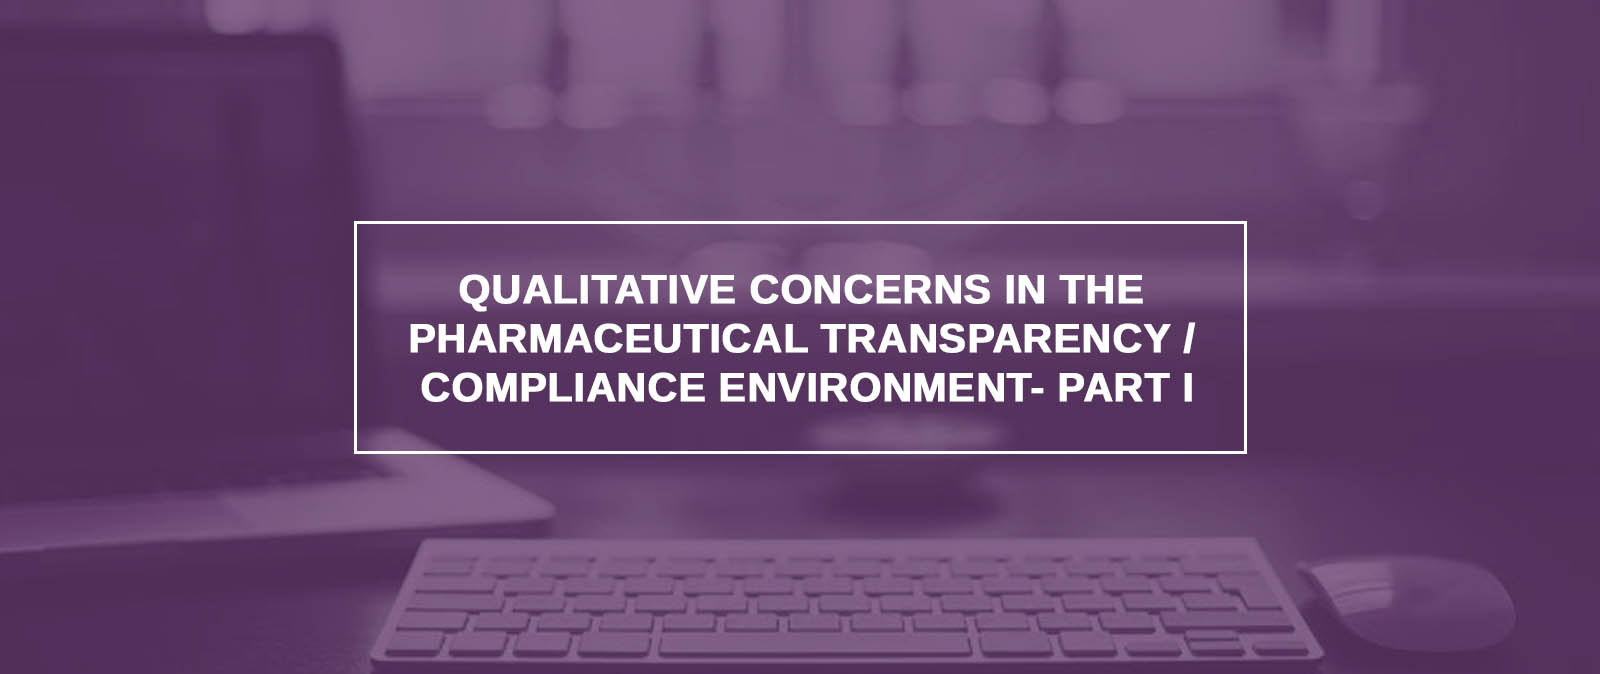 Qualitative Concerns In The Pharmaceutical Transparency/Compliance Environment